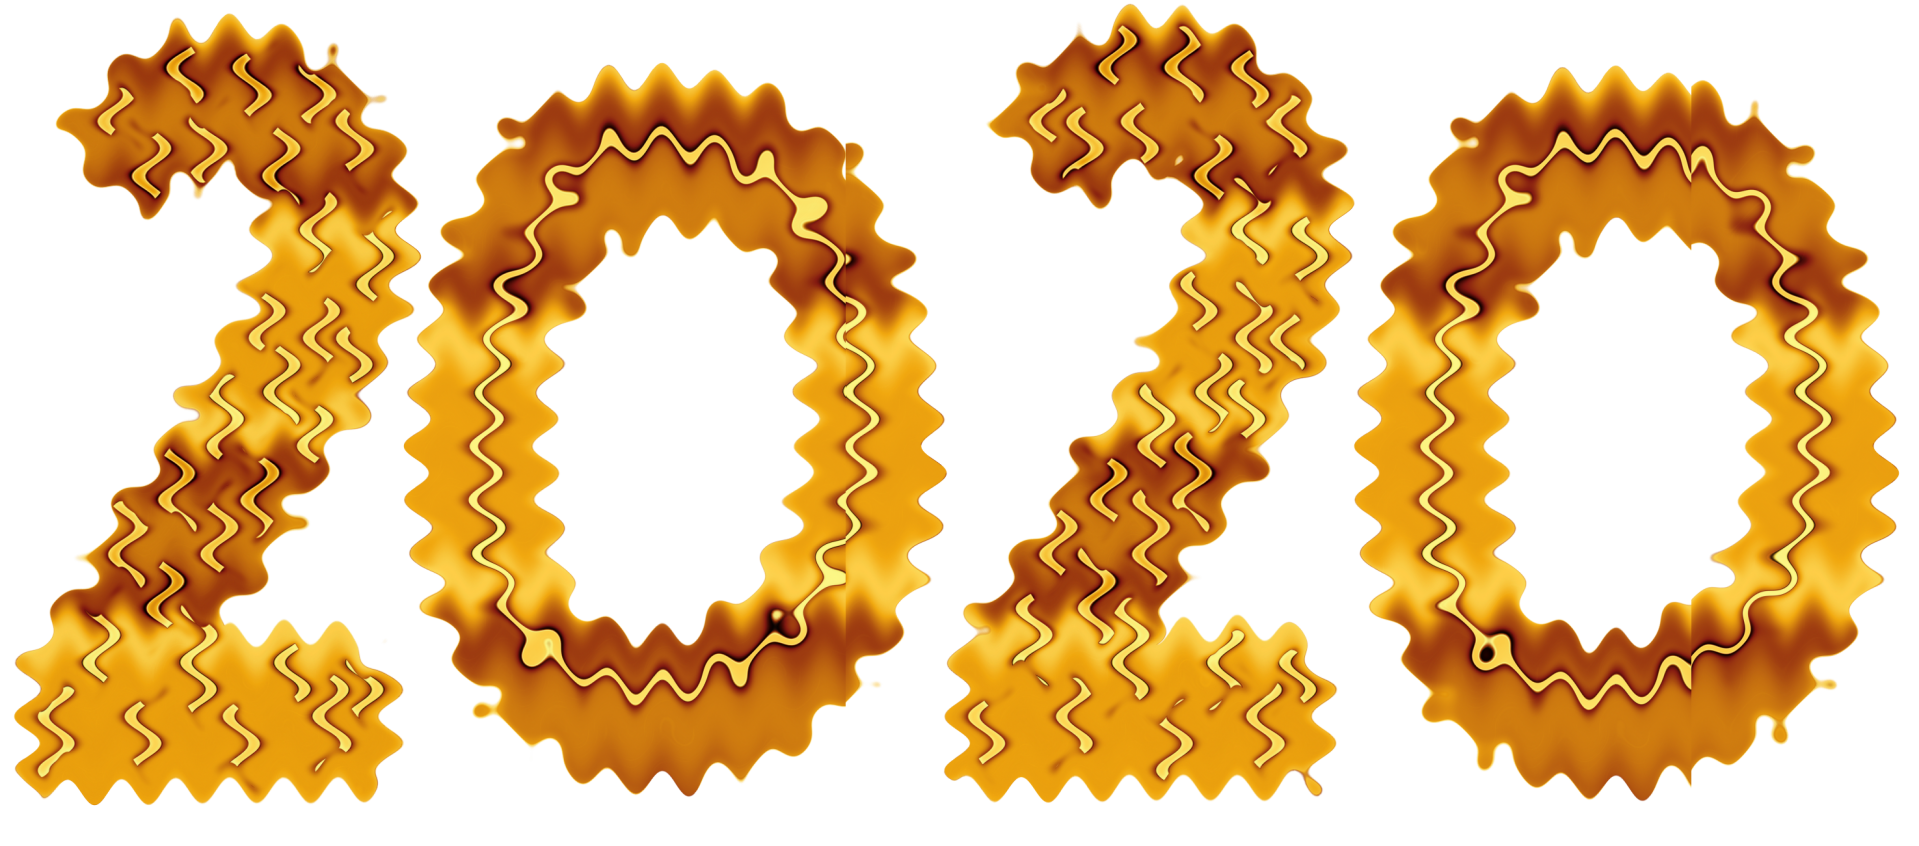 WordArt with the number 2020 stylized gold on transparent background for scrapbooking and or others